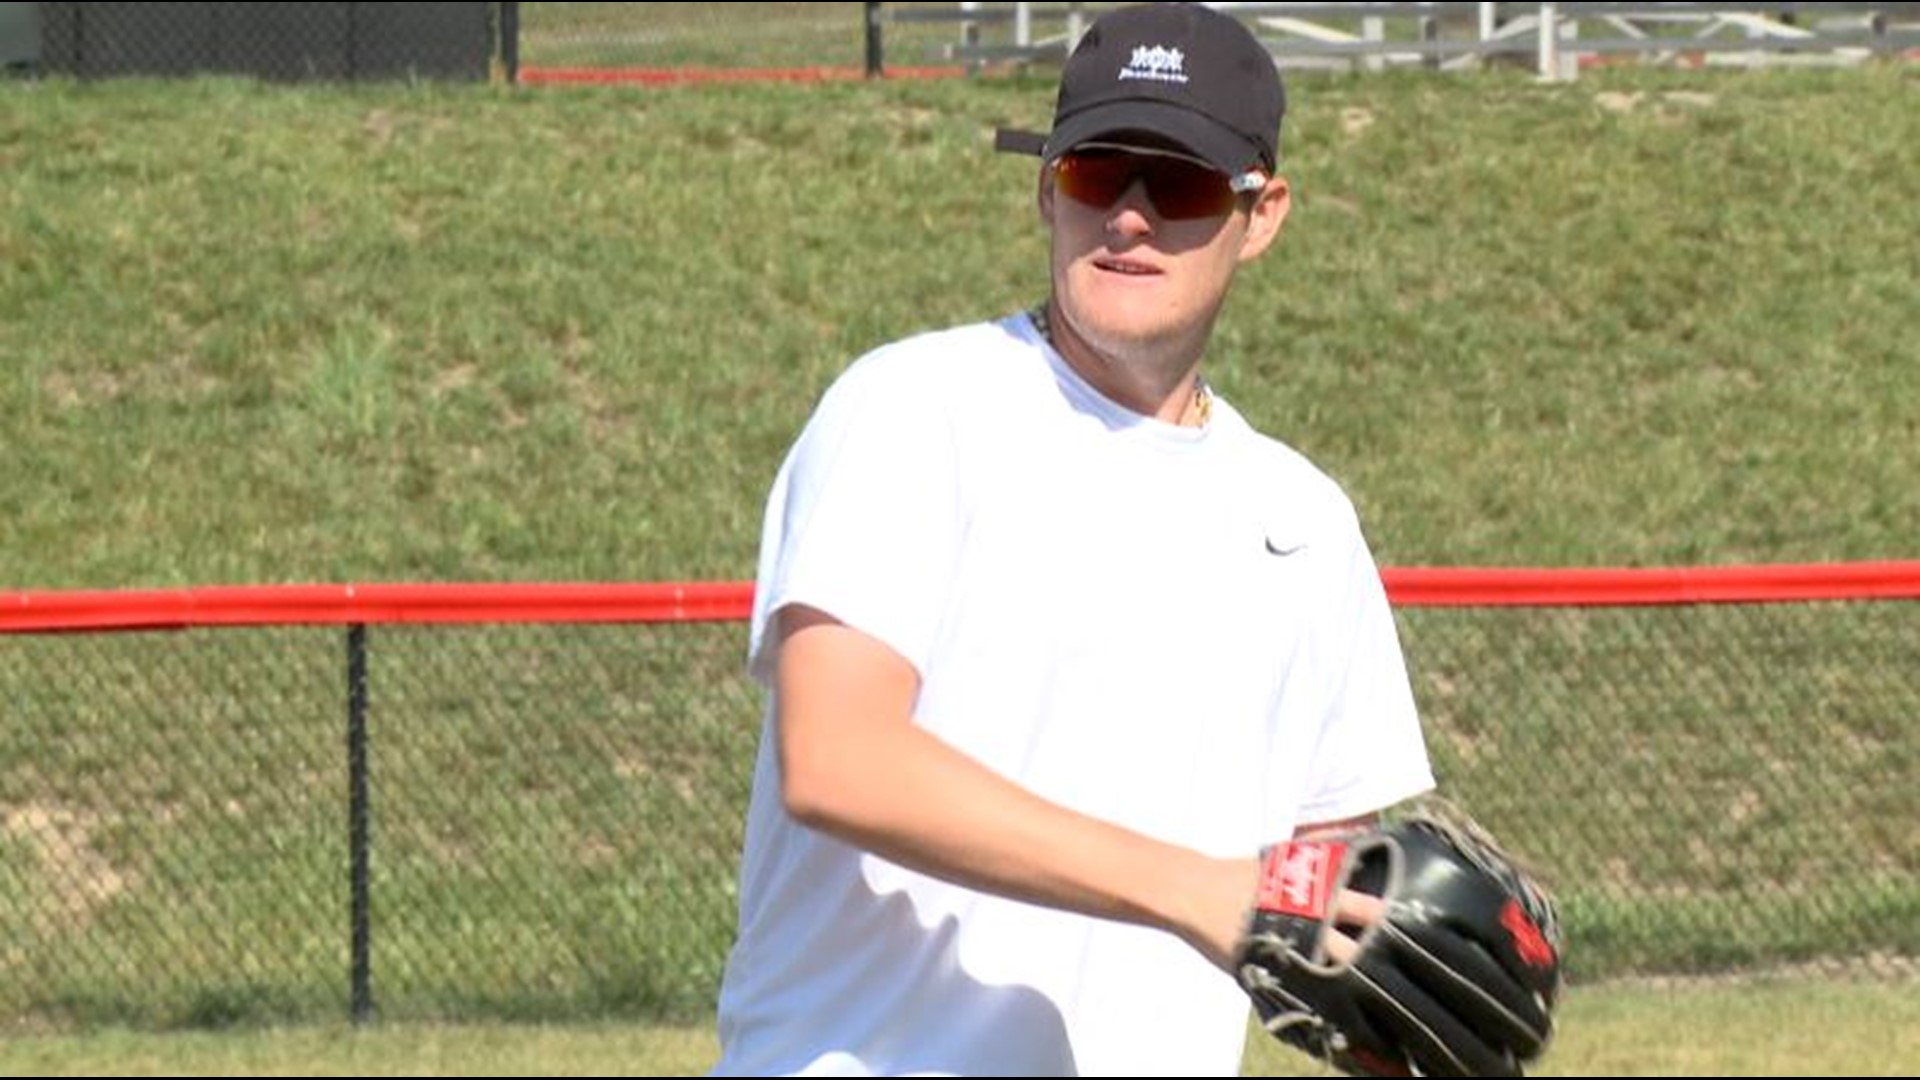 The New Albany native is recovering from his second Tommy John surgery.